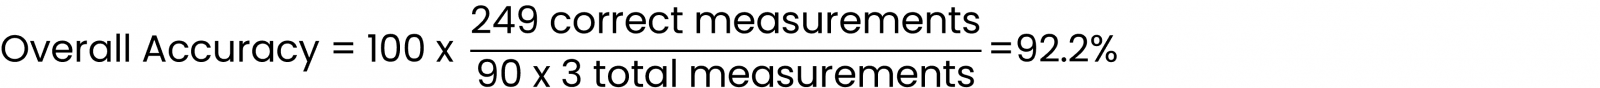 How to calculate Overall Accuracy of a measurement system. Use this simple formula. 